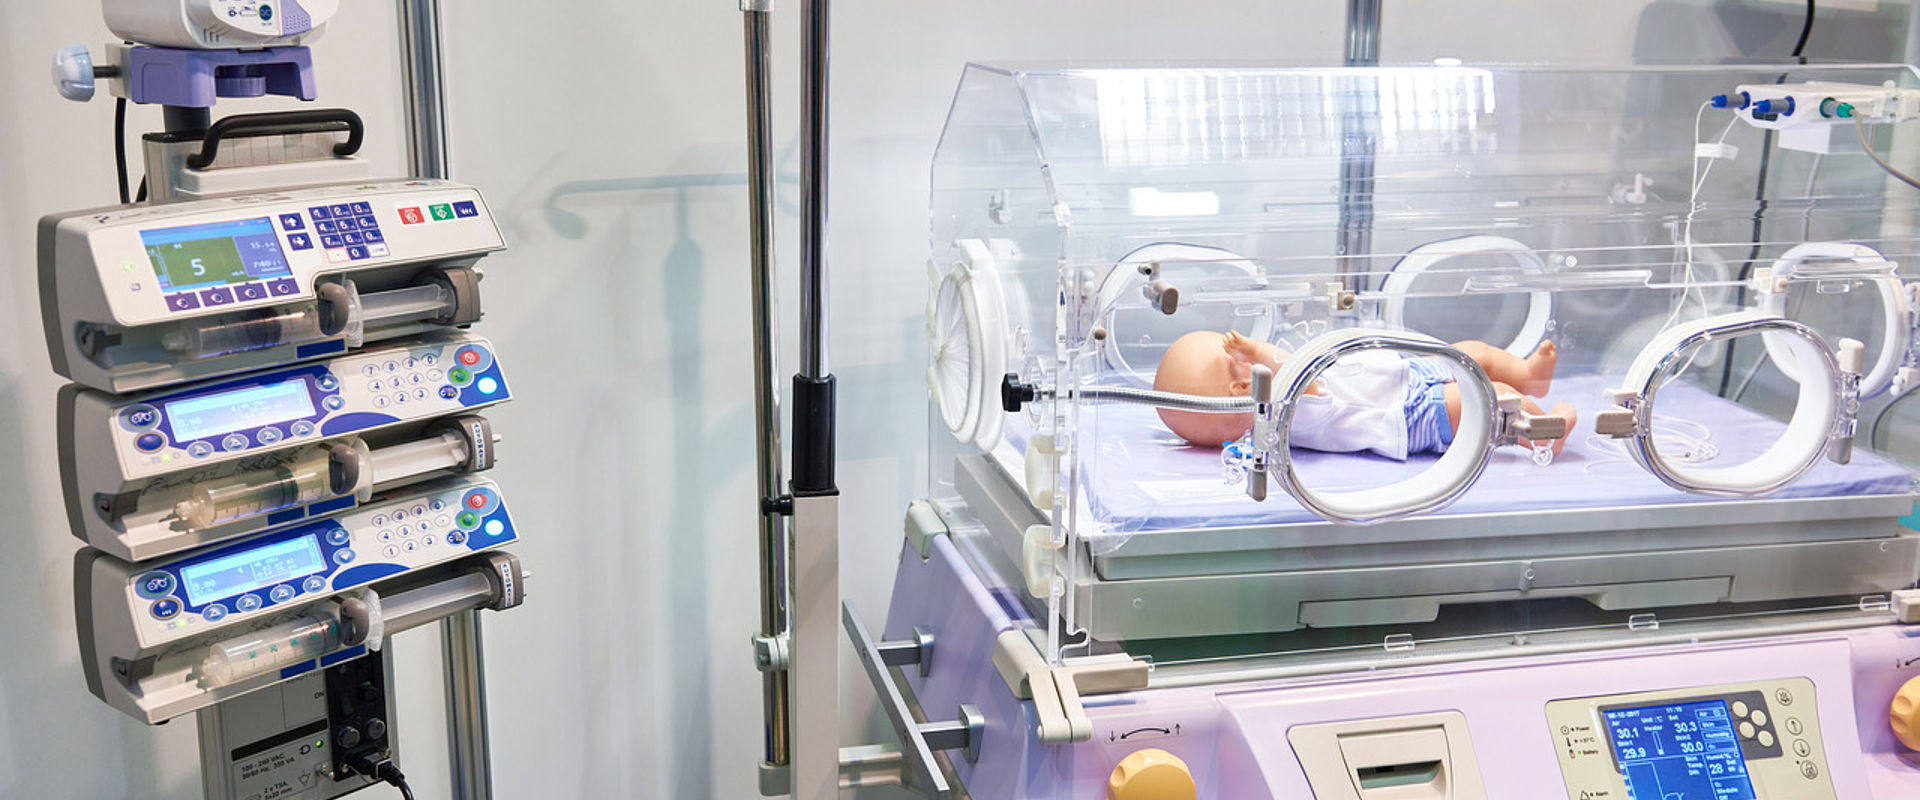 Incubator for newborns and syringe infusion pumps in clinic